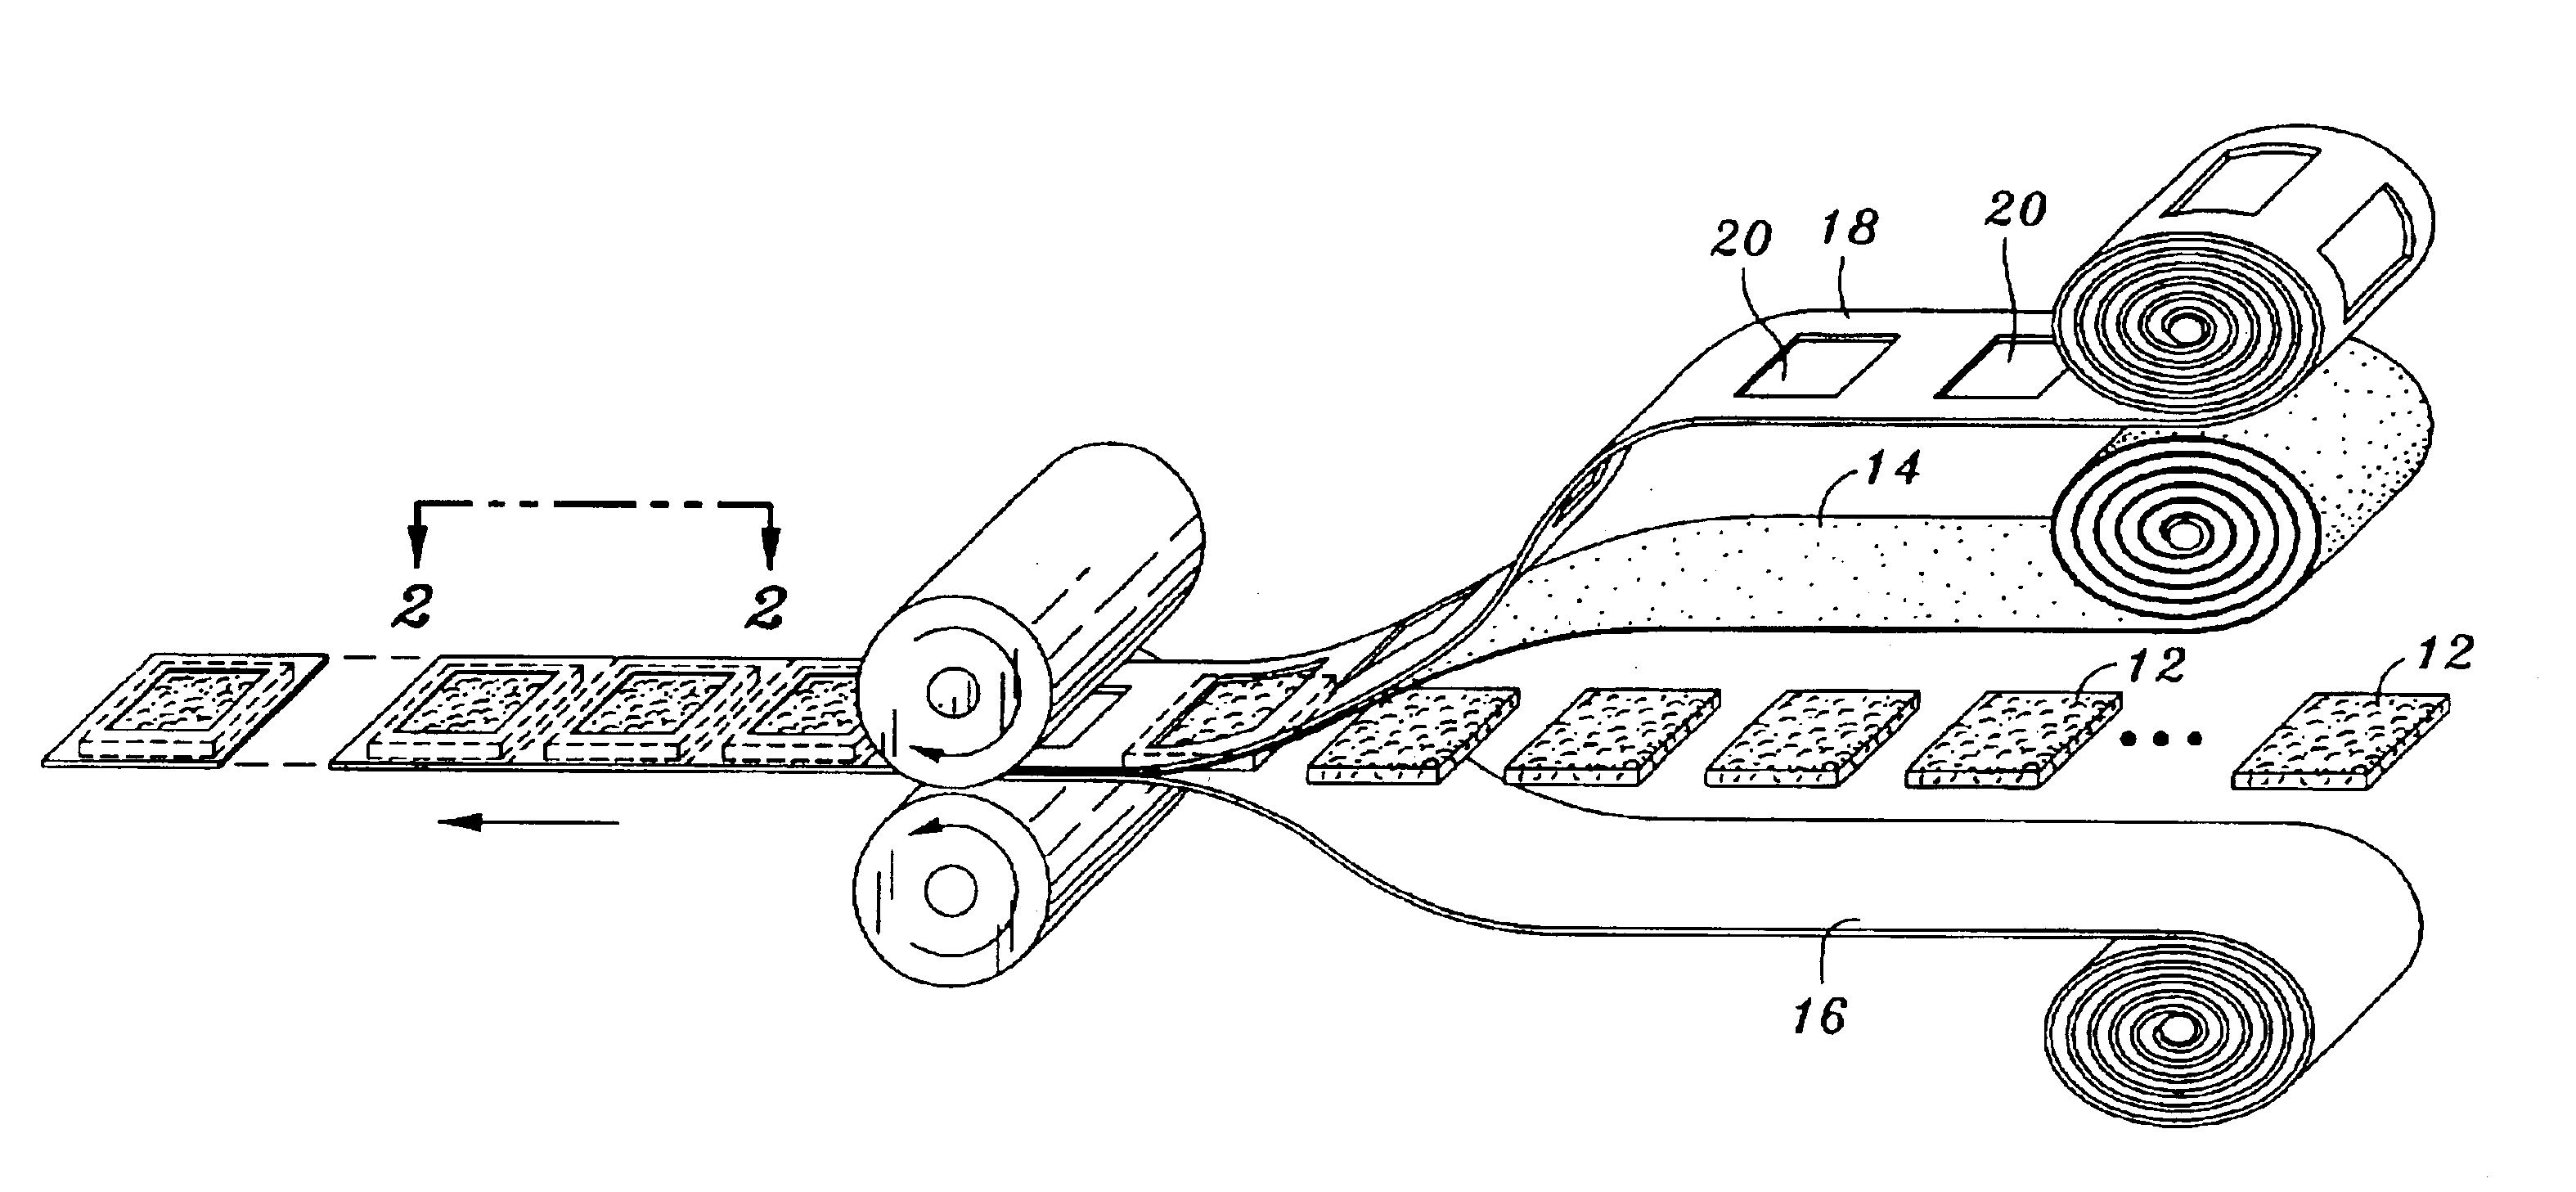 Method of forming absorbent pad using precut overlay